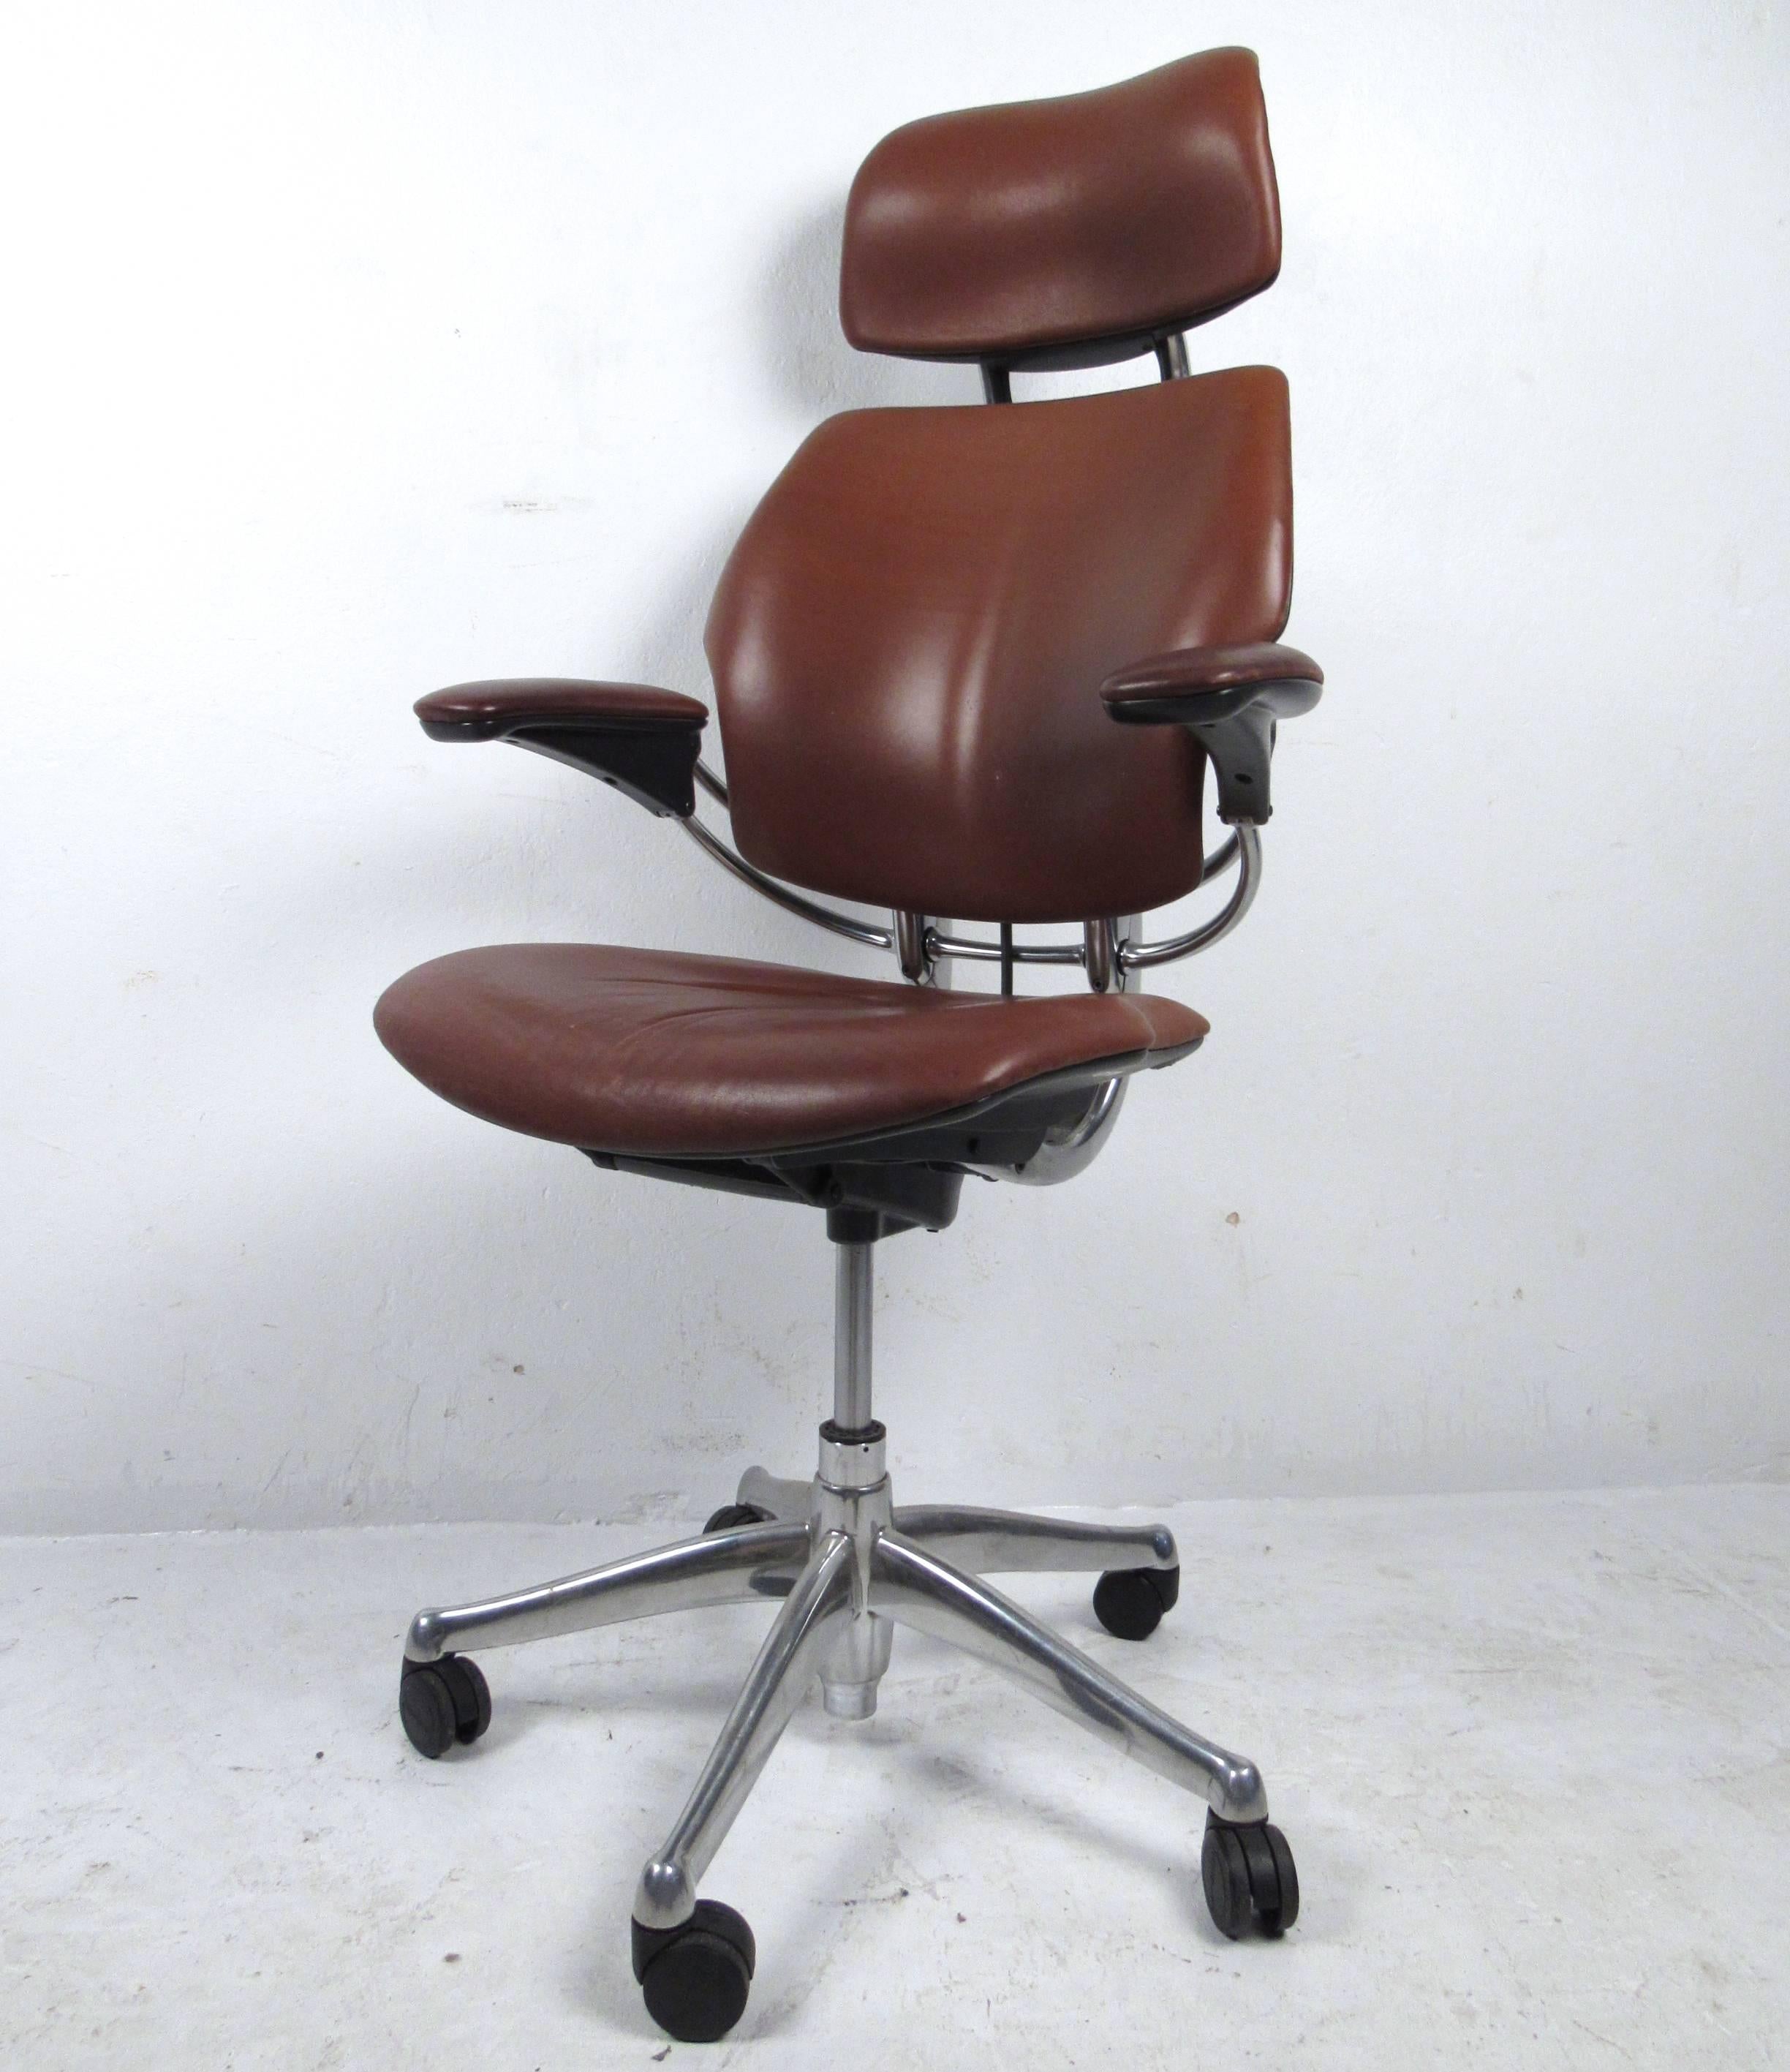 The high quality ergonomic headrest Freedom chair by Humanscale offers an extreme level of easy customization, allowing you to adjust your posture and positioning to the perfect specifications. This listing is for one chair, please specific which of